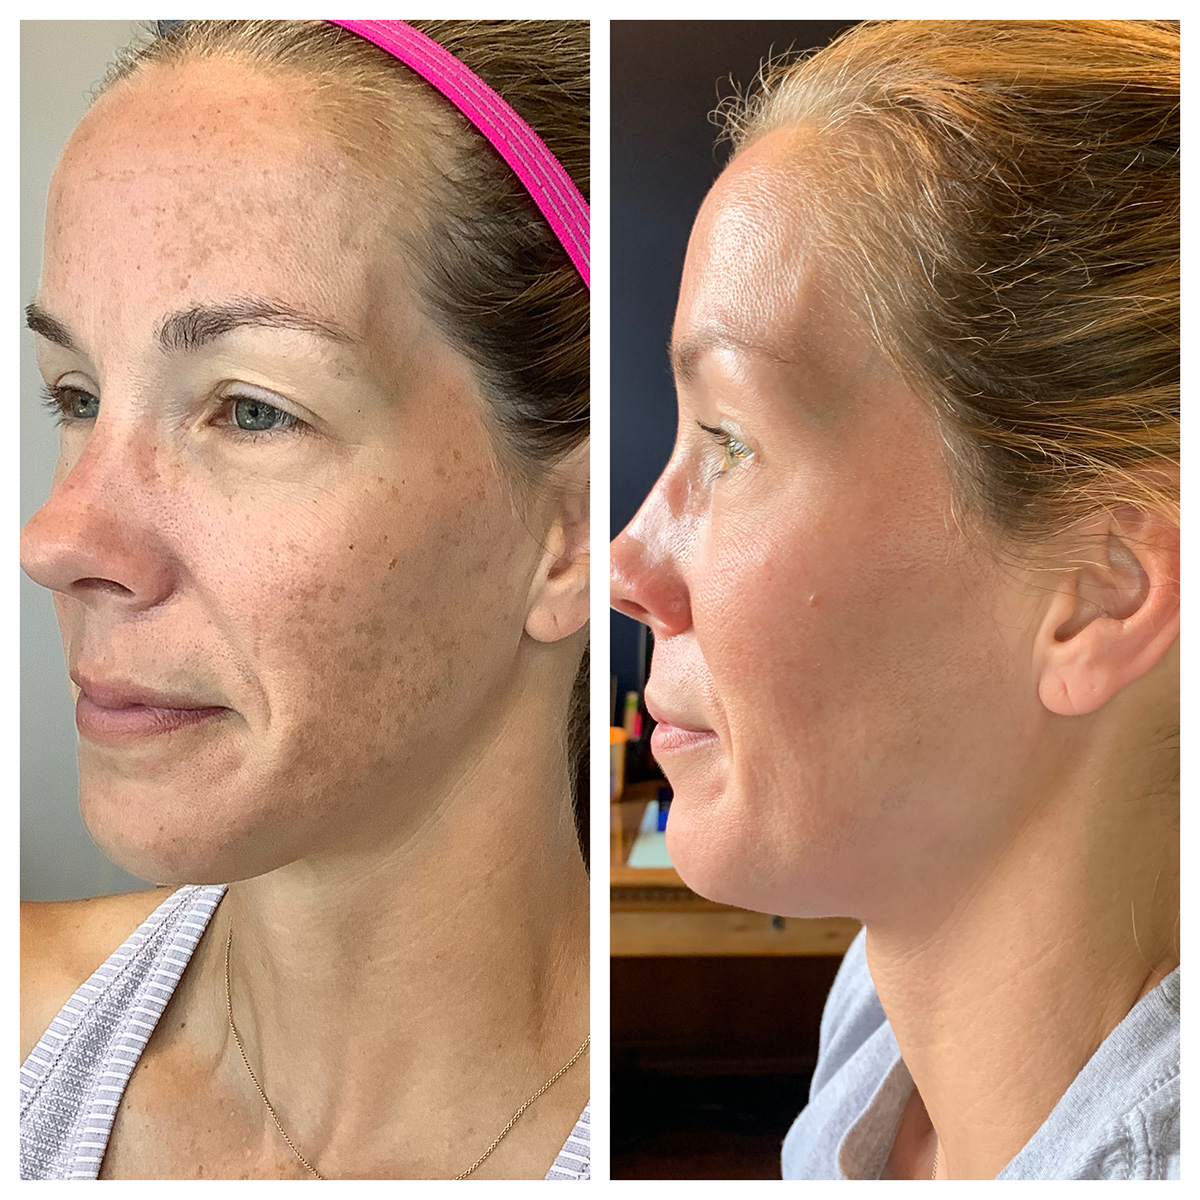 ZO Pigmet Program Before and After Photo by Kim Engelhardt, MSN, APRN, ANP-BC in Brentwood, Tennessee